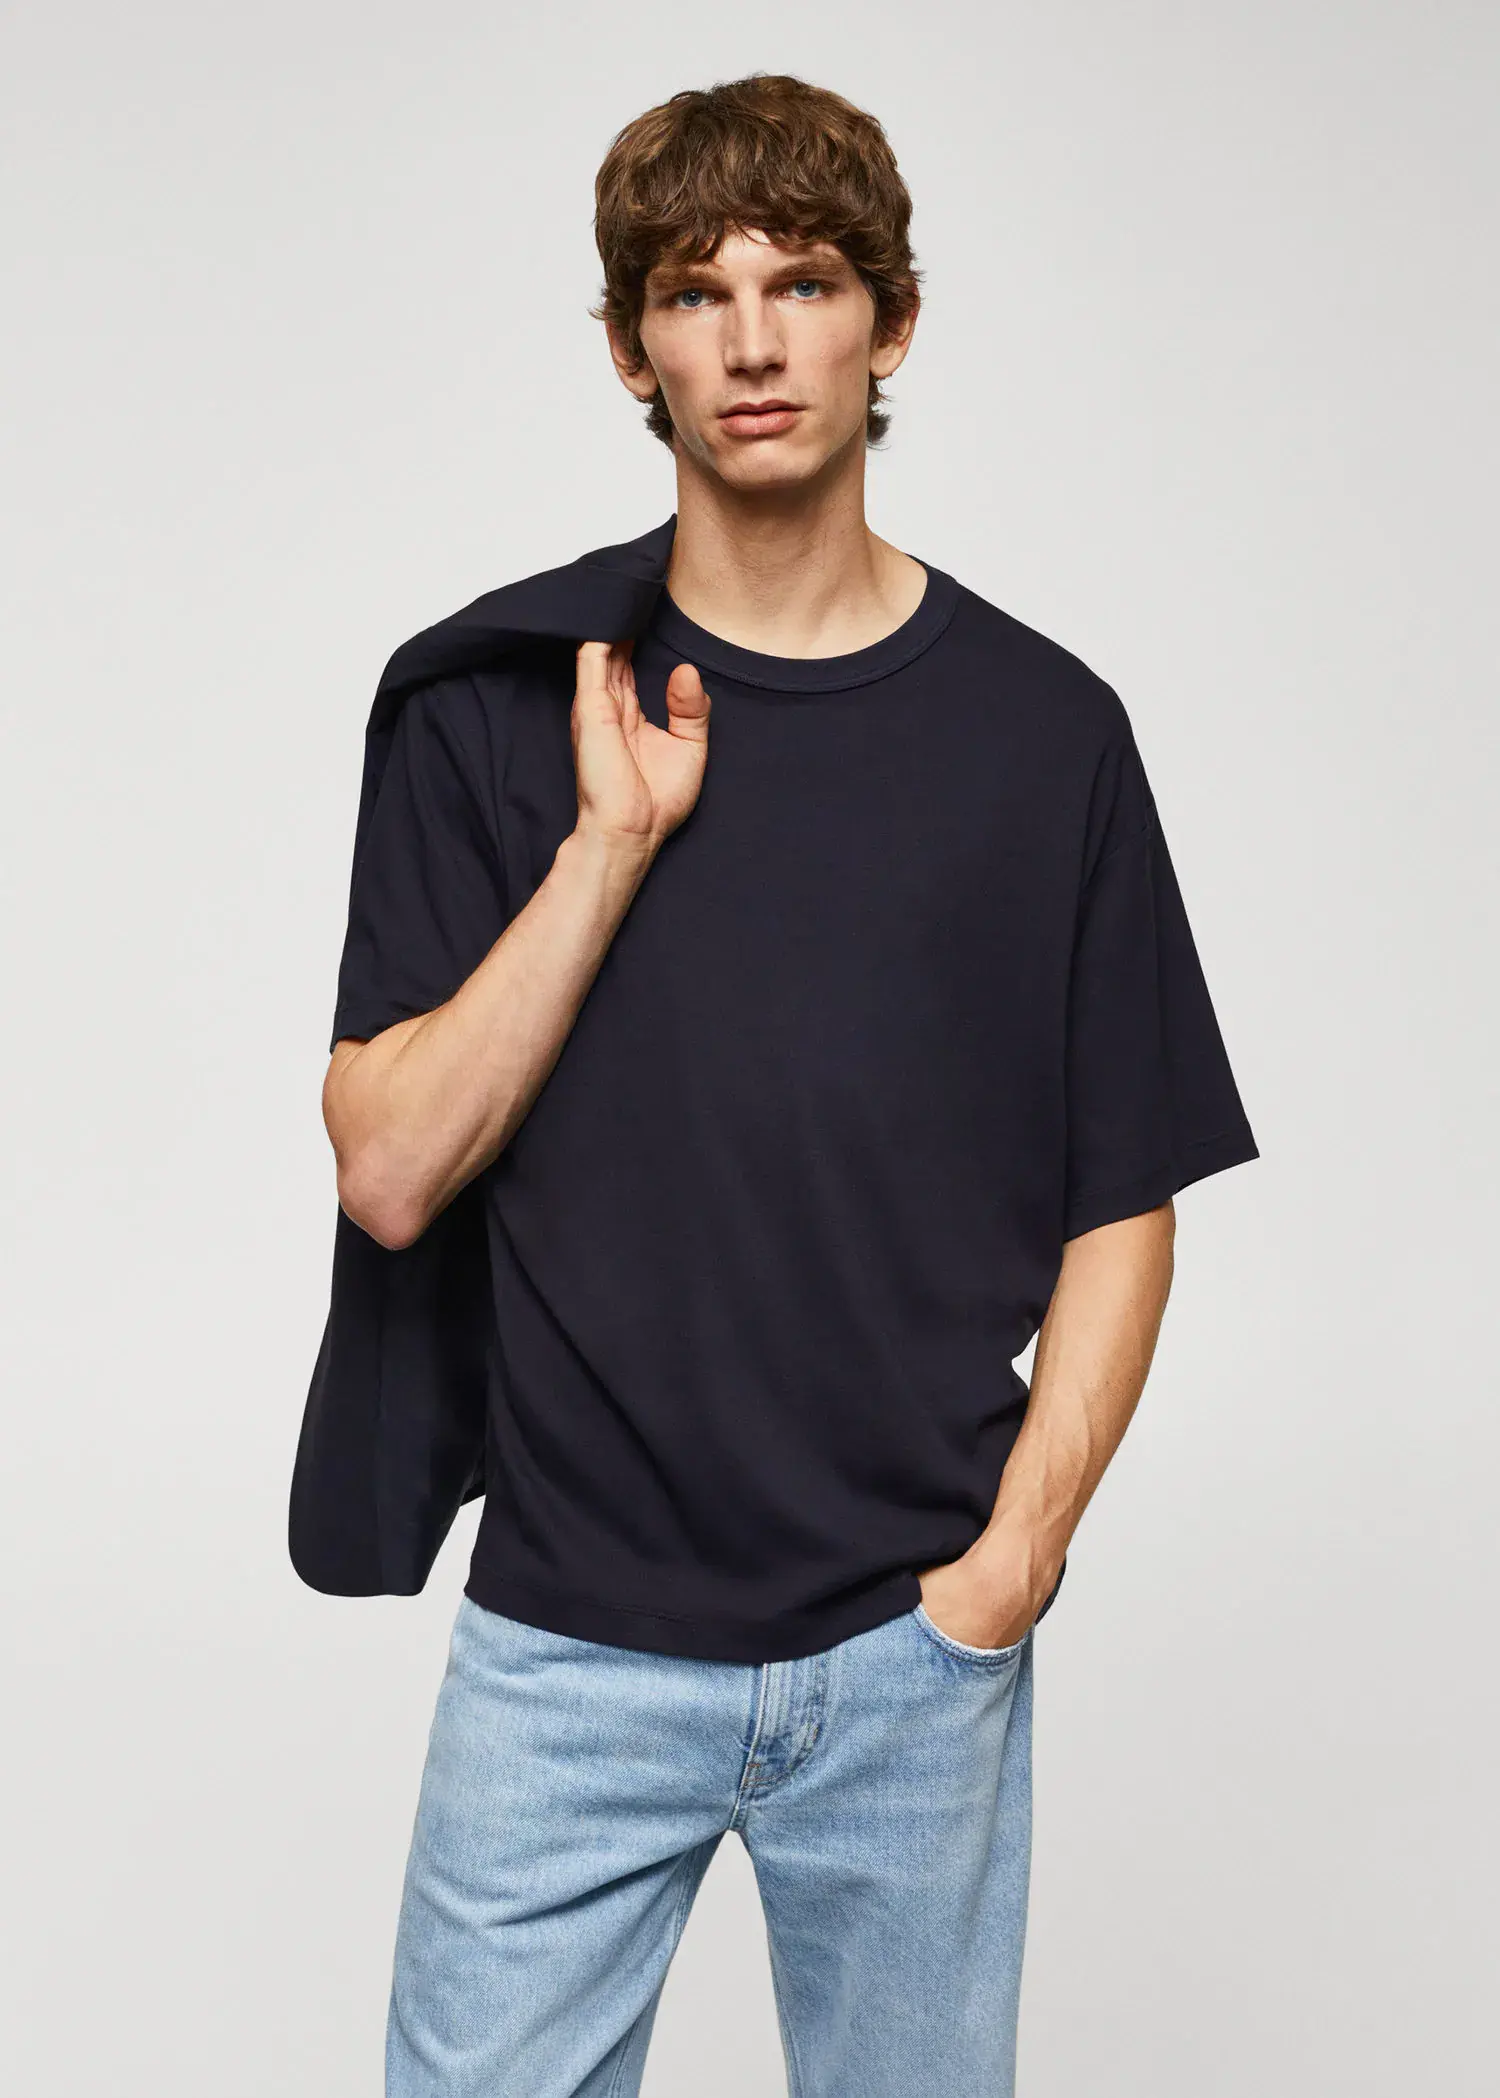 Mango 100% cotton relaxed-fit t-shirt. 1